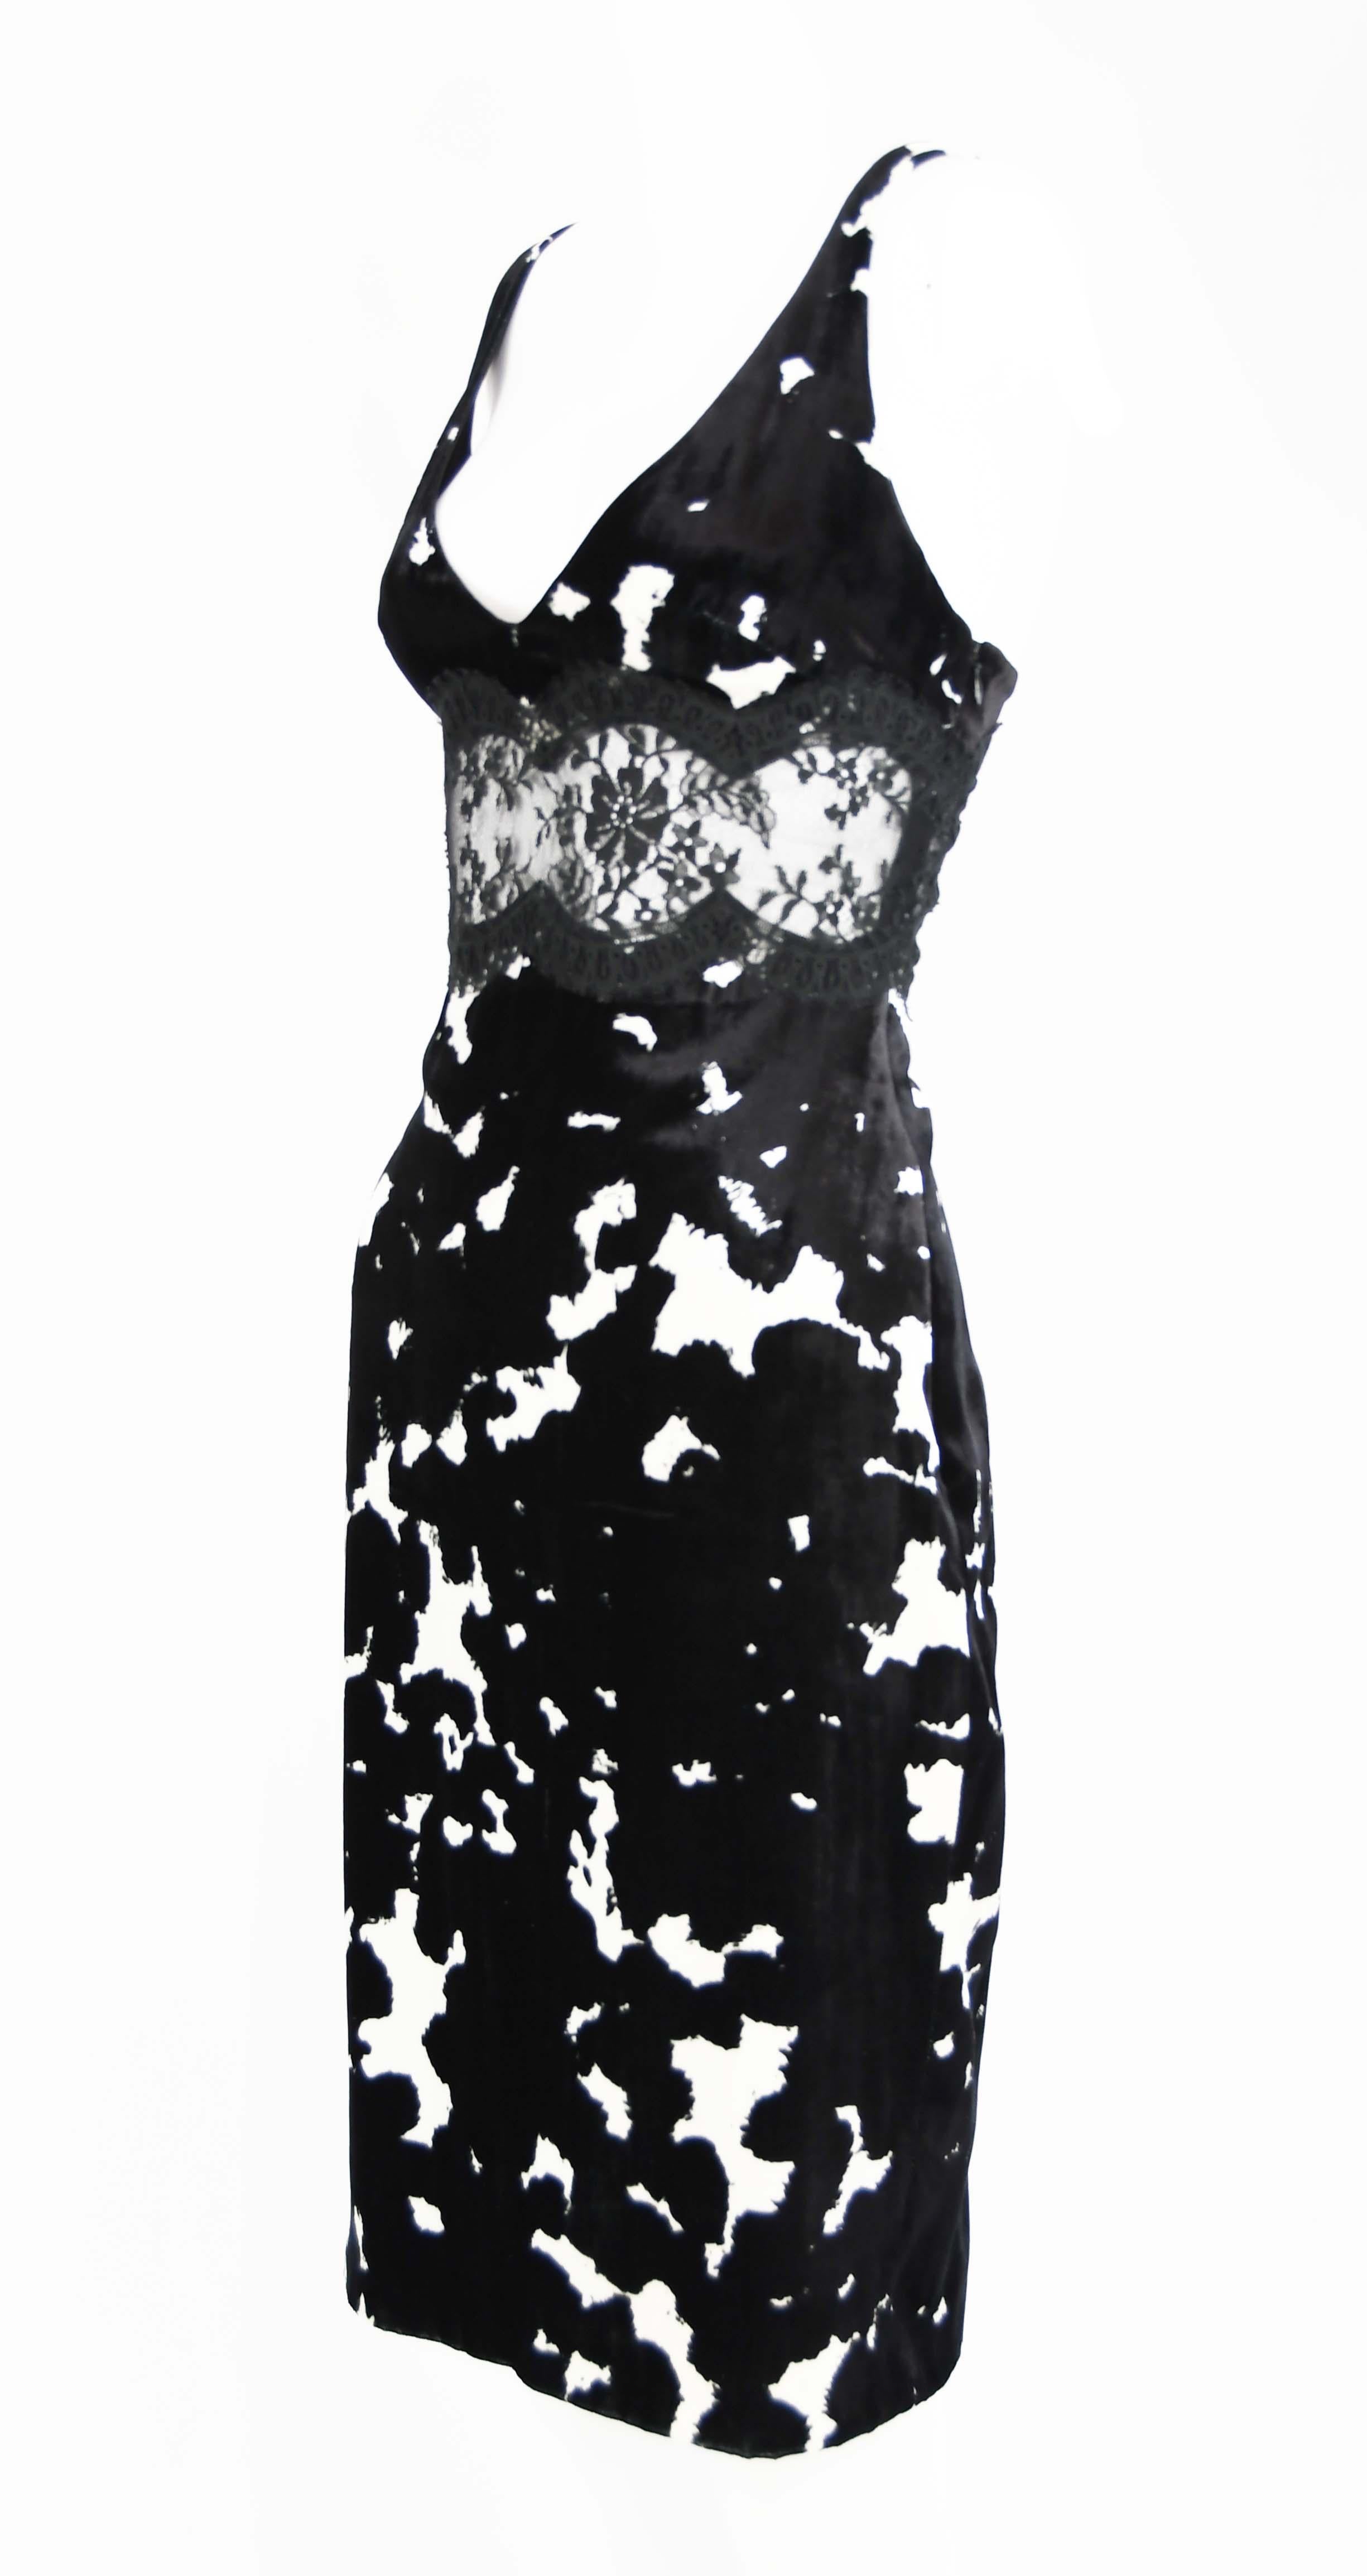 Fitted, sleeveless Versace black and white pattern dress in gorgeous velvet with a low v neck.  Lace insert under bust.  Perfect cocktail party attire.

Size: IT 42

Condition: Excellent condition

Composition: 81% rayon, 18% silk, 1% nylon

Care: